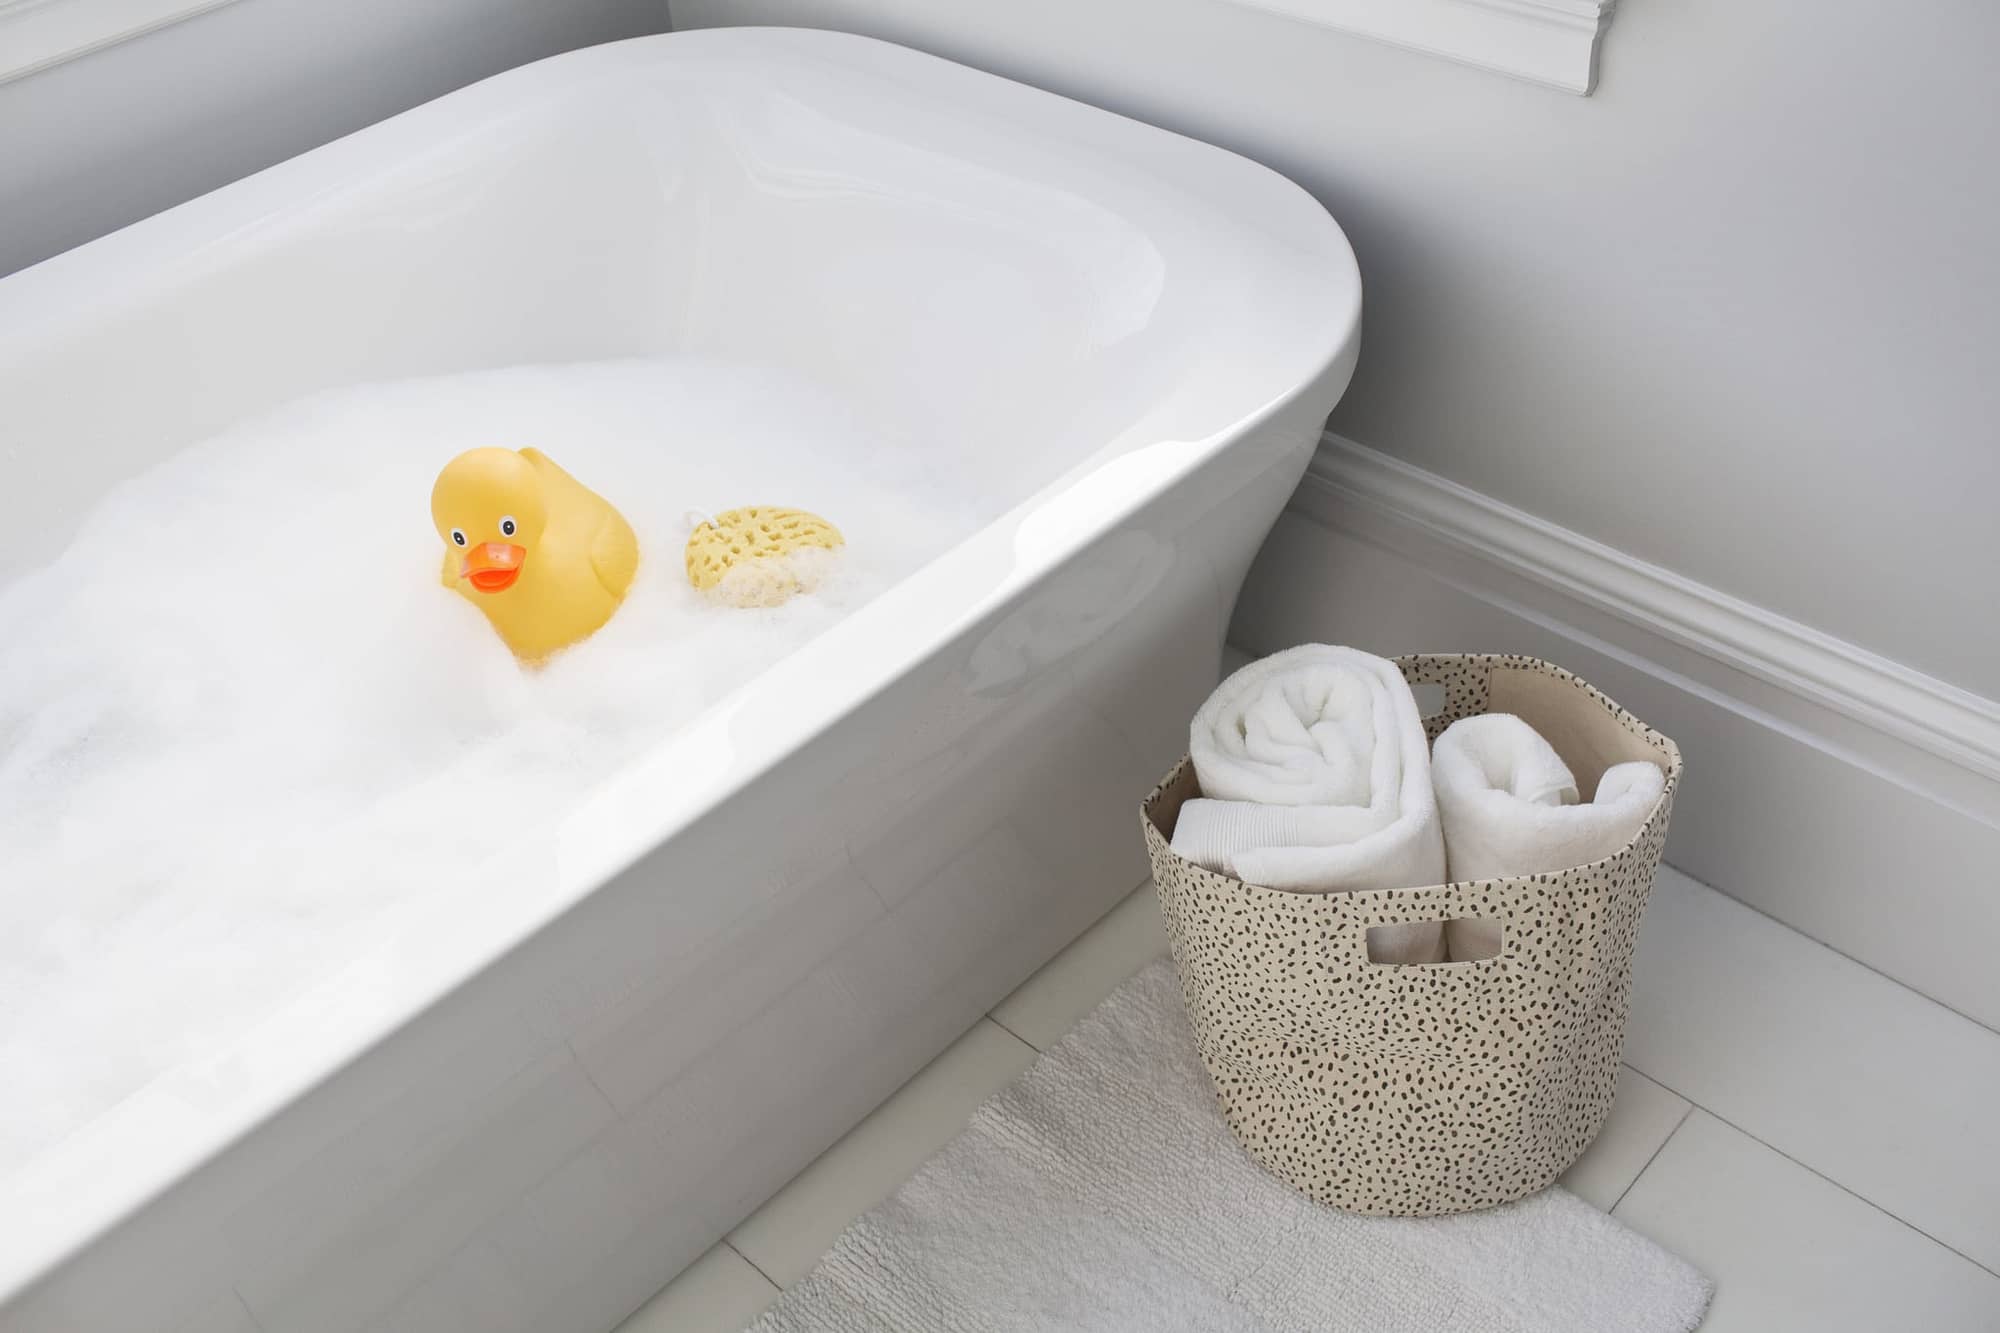 You are currently viewing Rub a Dub Dub how to really clean your Tub!